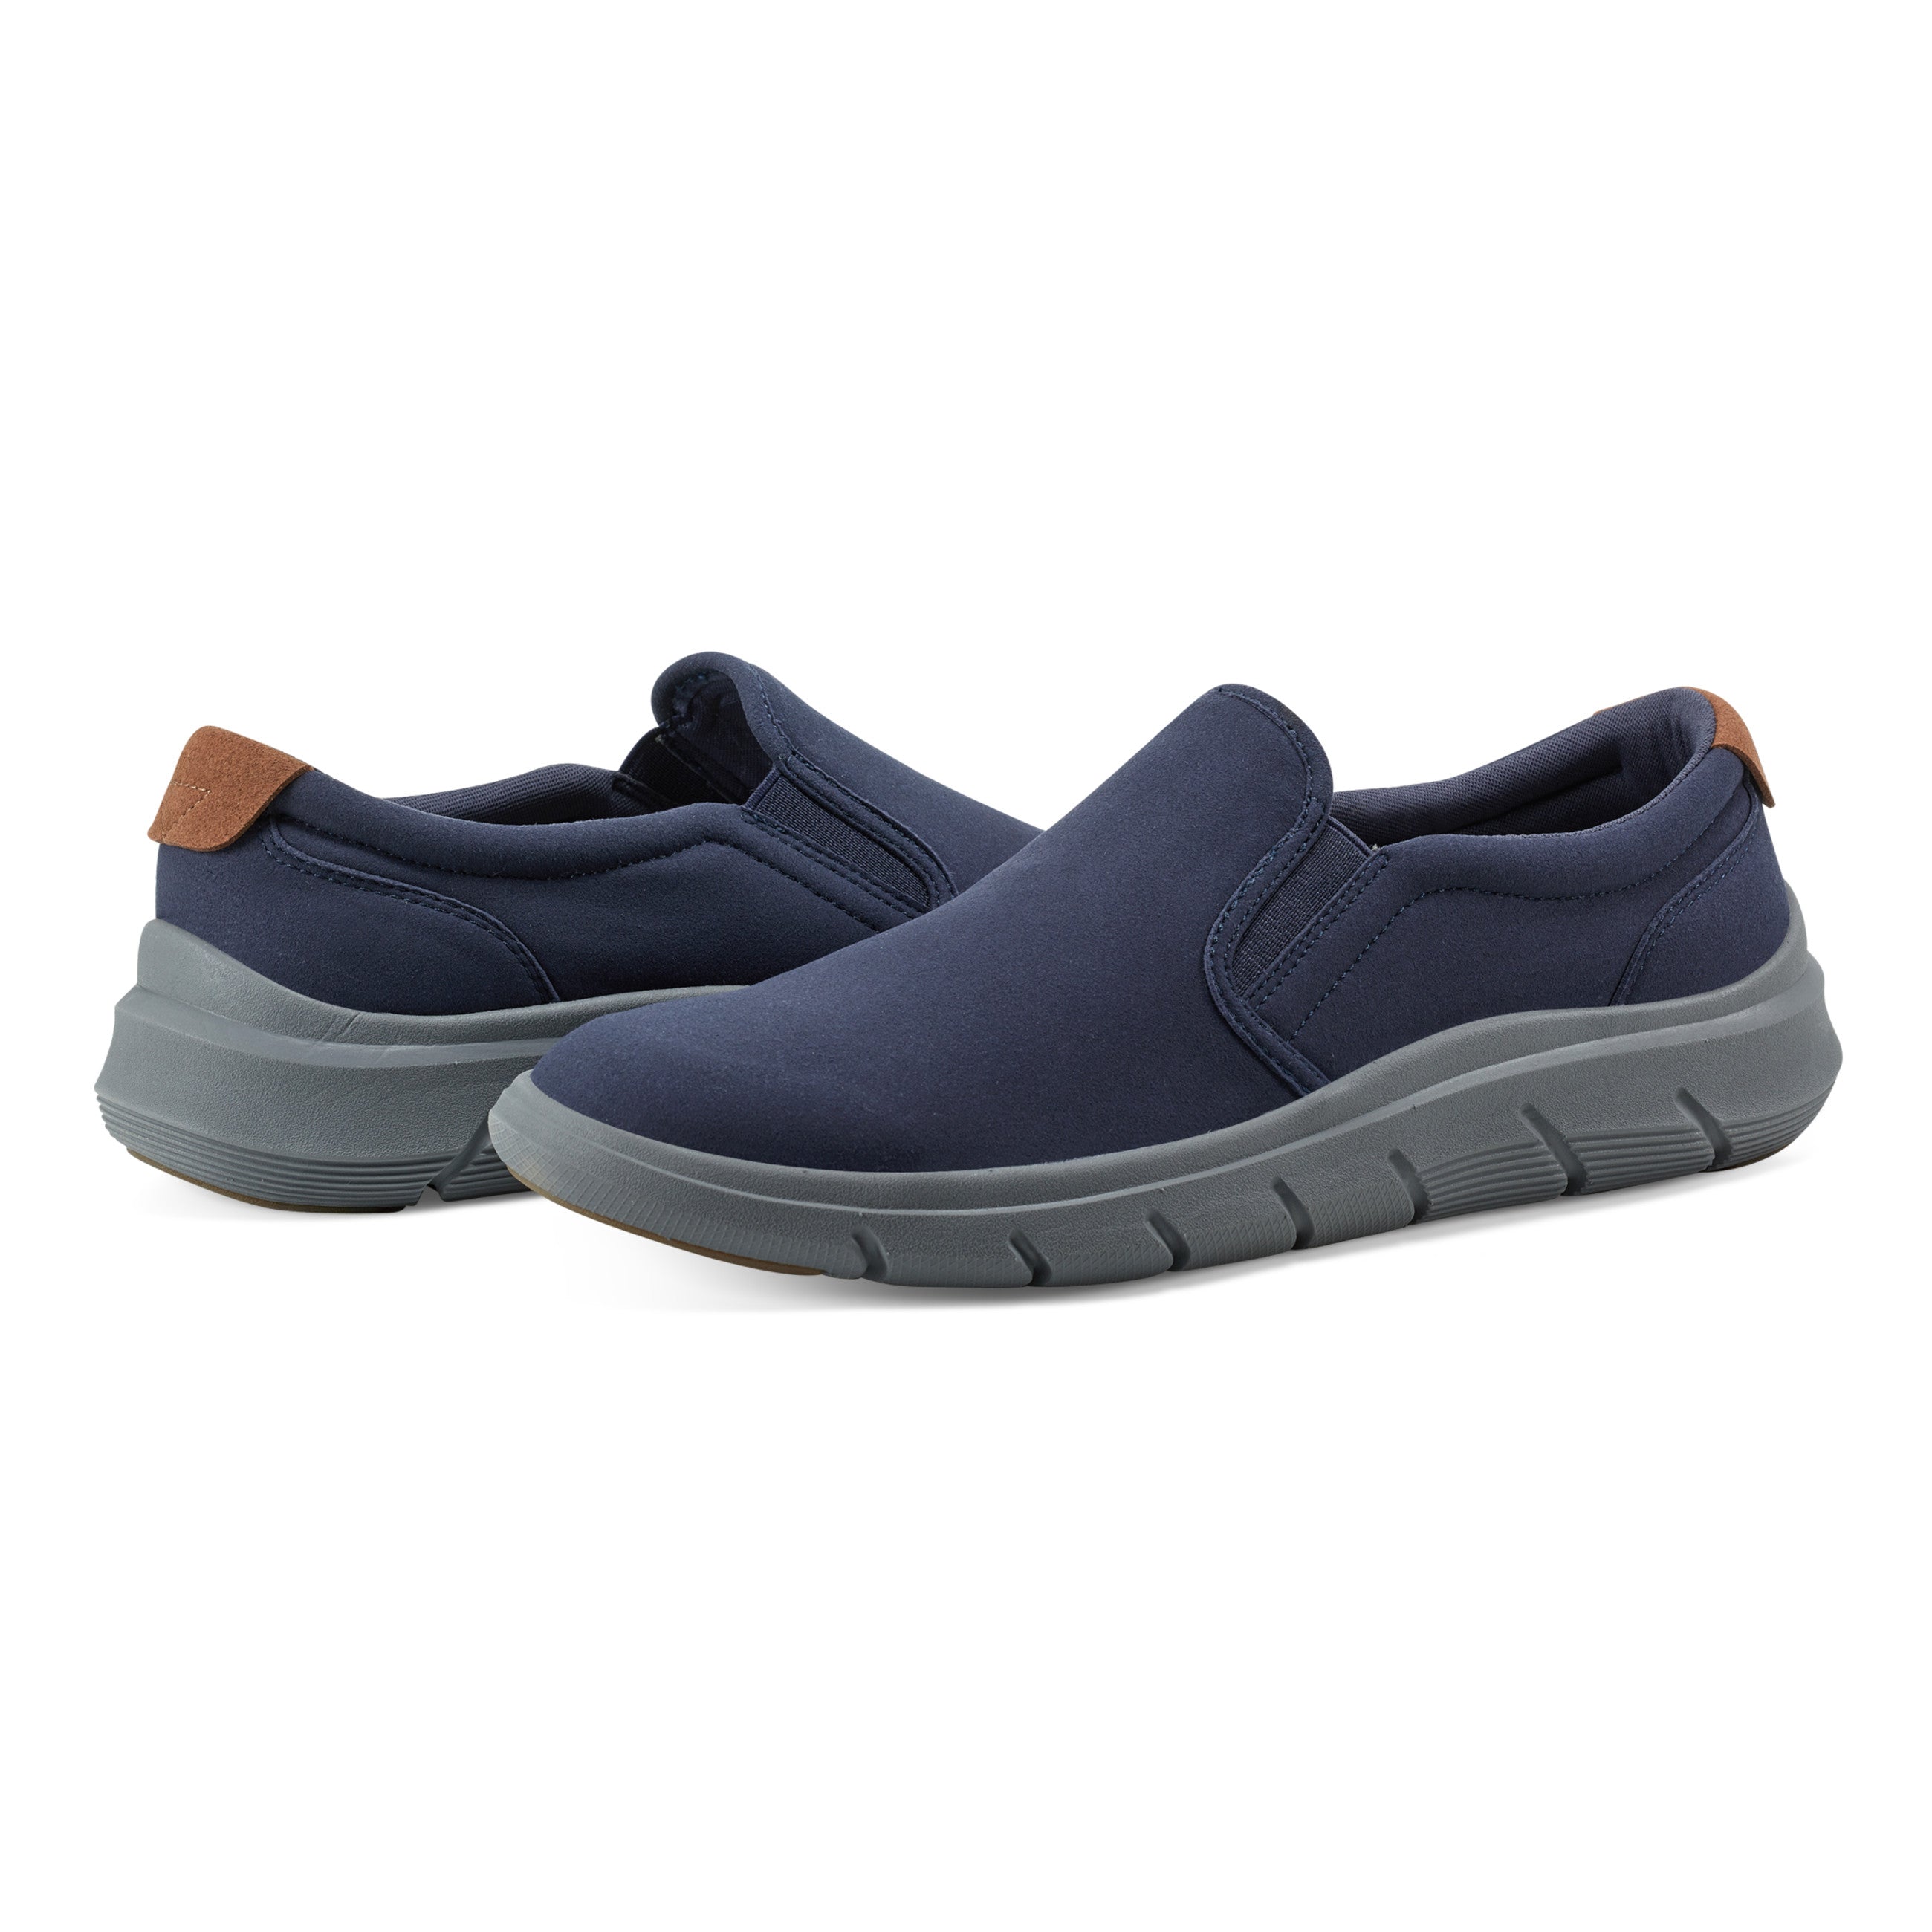 Chad Mens Slip On Casual Sneakers